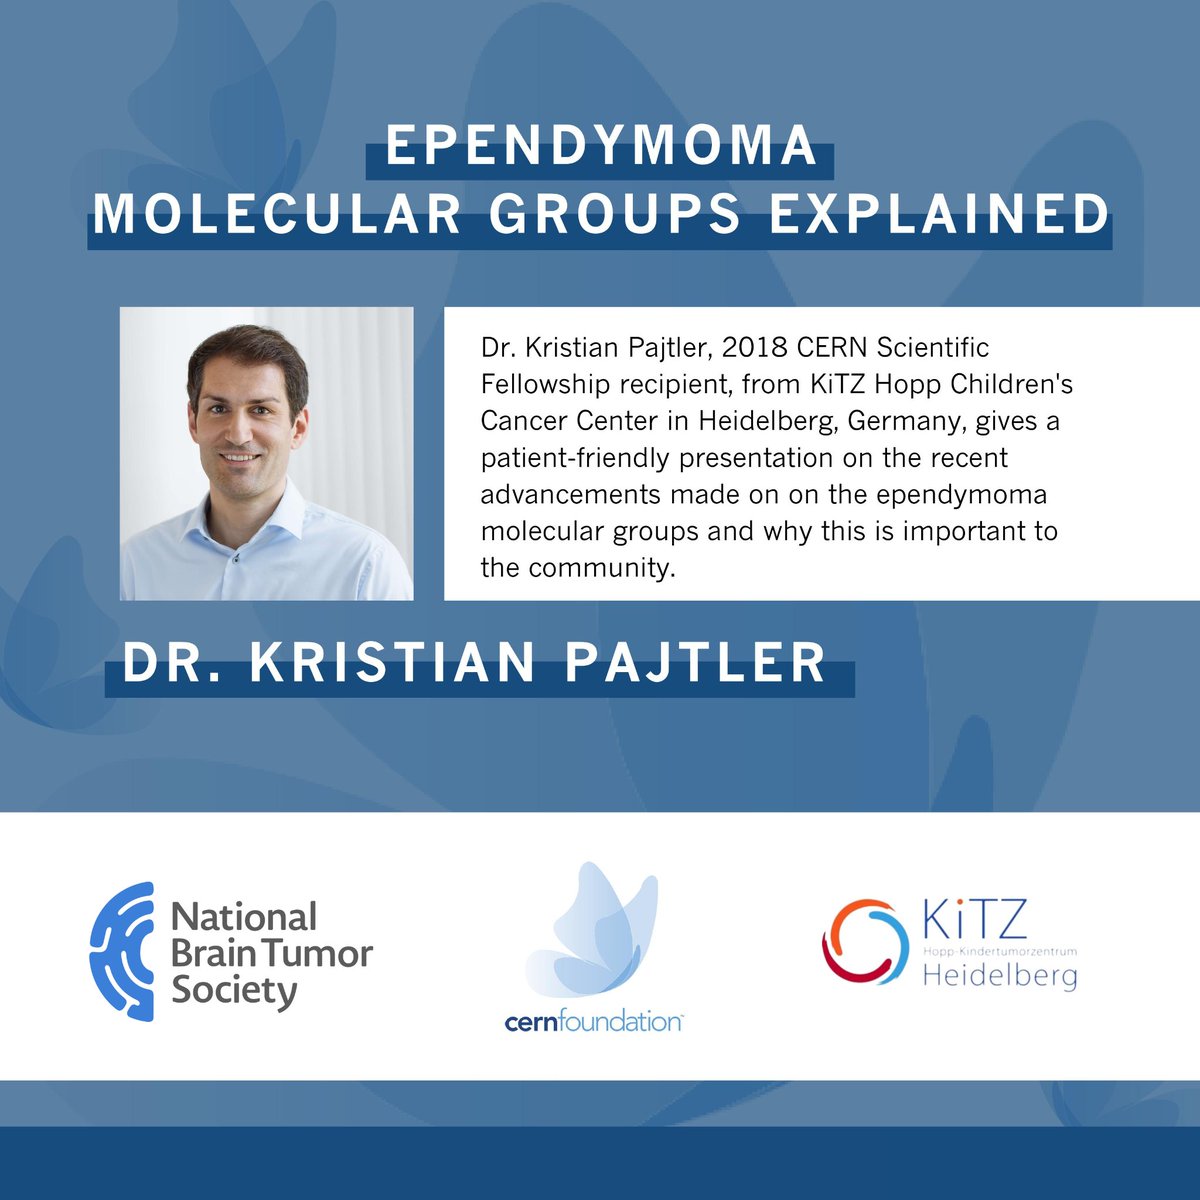 Dr. Kristian Pajtler, 2018 CERN Scientific Fellowship Recipient, from KiTZ Hopp Children’s Cancer Center, @KiTZ_HD, in Heidelberg, Germany, gives a patient-friendly presentation on advancements made in the #ependymoma molecular groups: youtube.com/watch?v=uxXqZn…